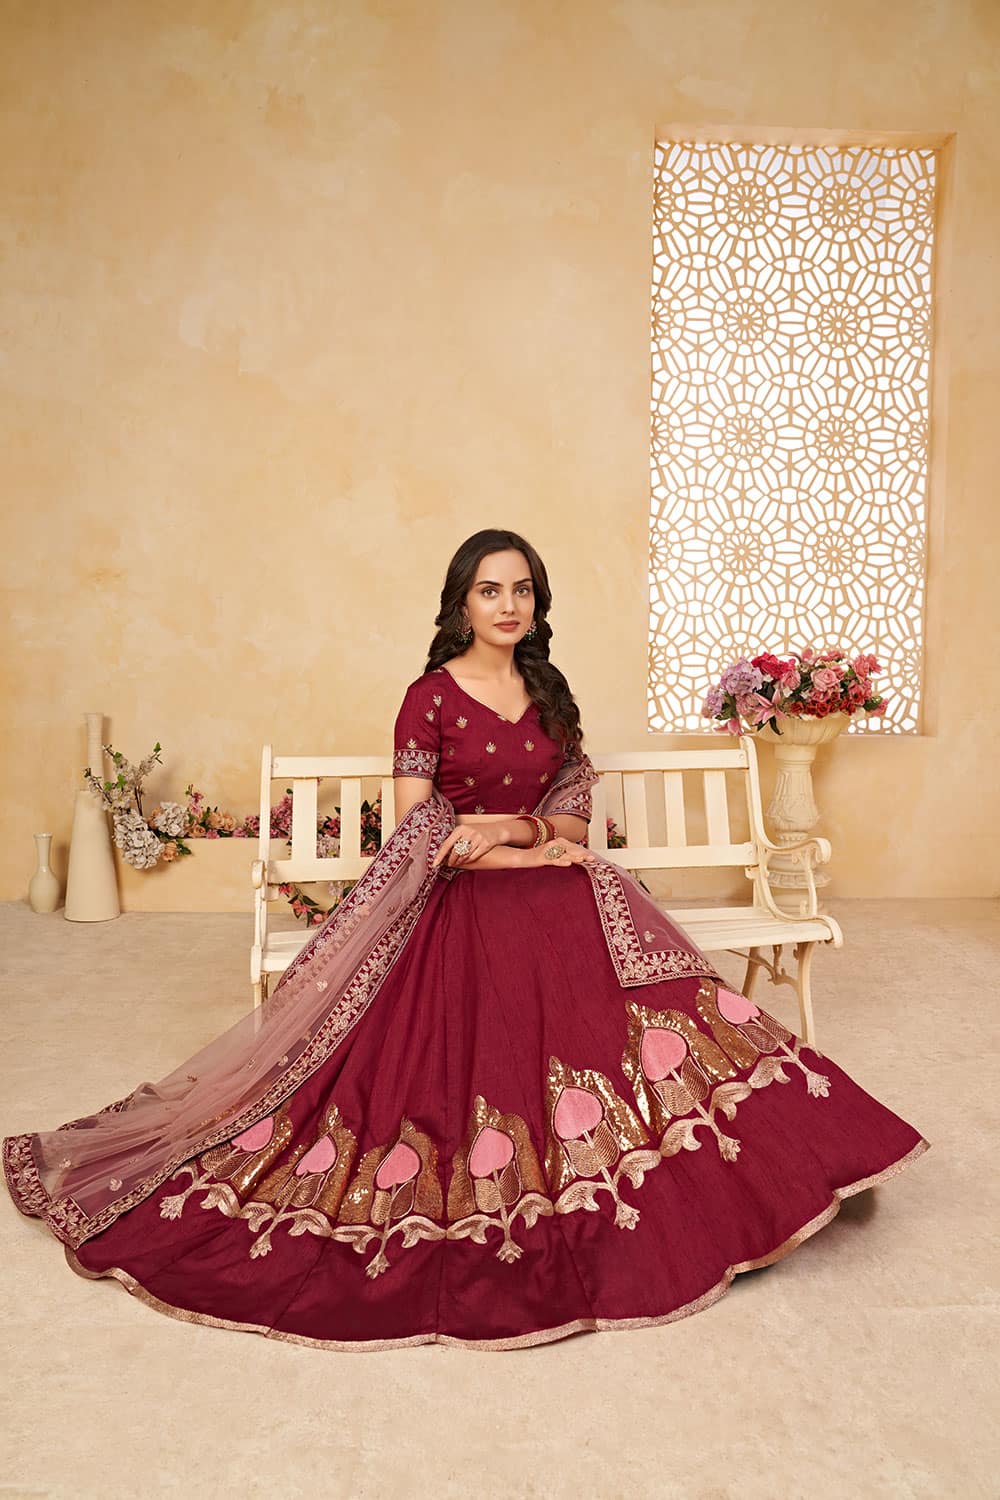 Erica Fernandes' dark red Sabyasachi lehenga is perfect for a 2020 bride -  Times of India